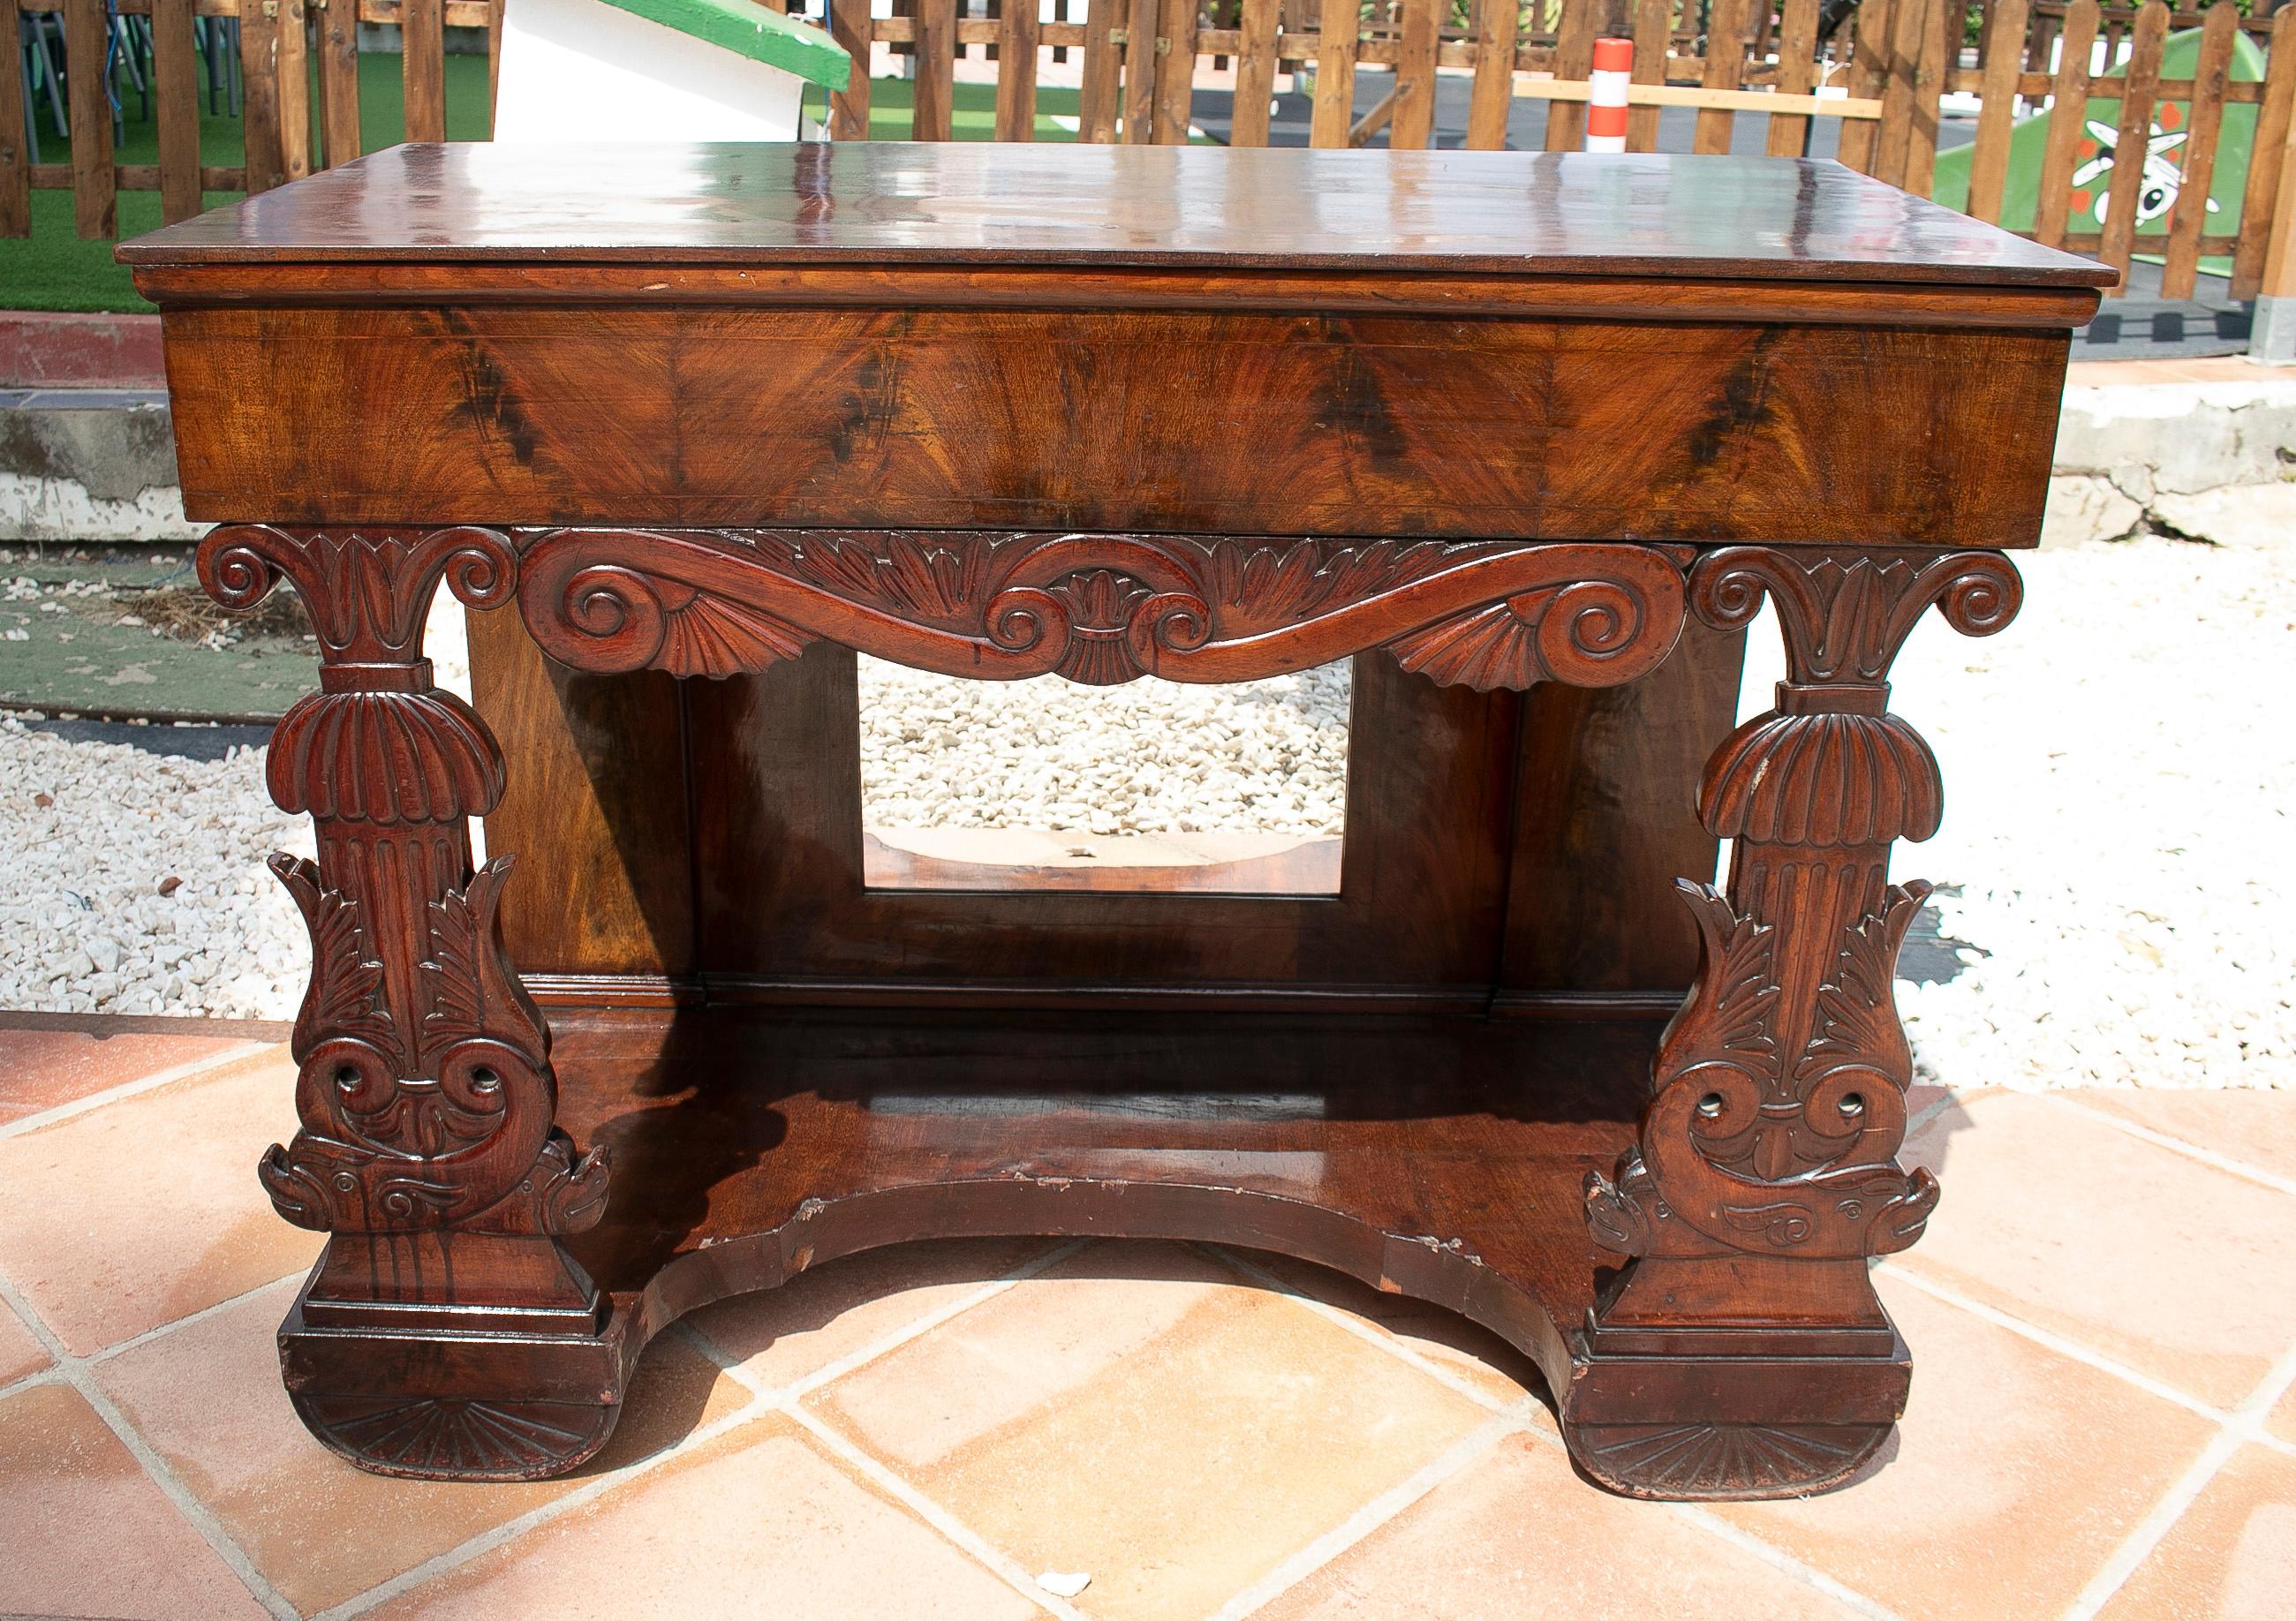 Antique 19th century Spanish Fernandino style mahogany root wood console table with mirror.